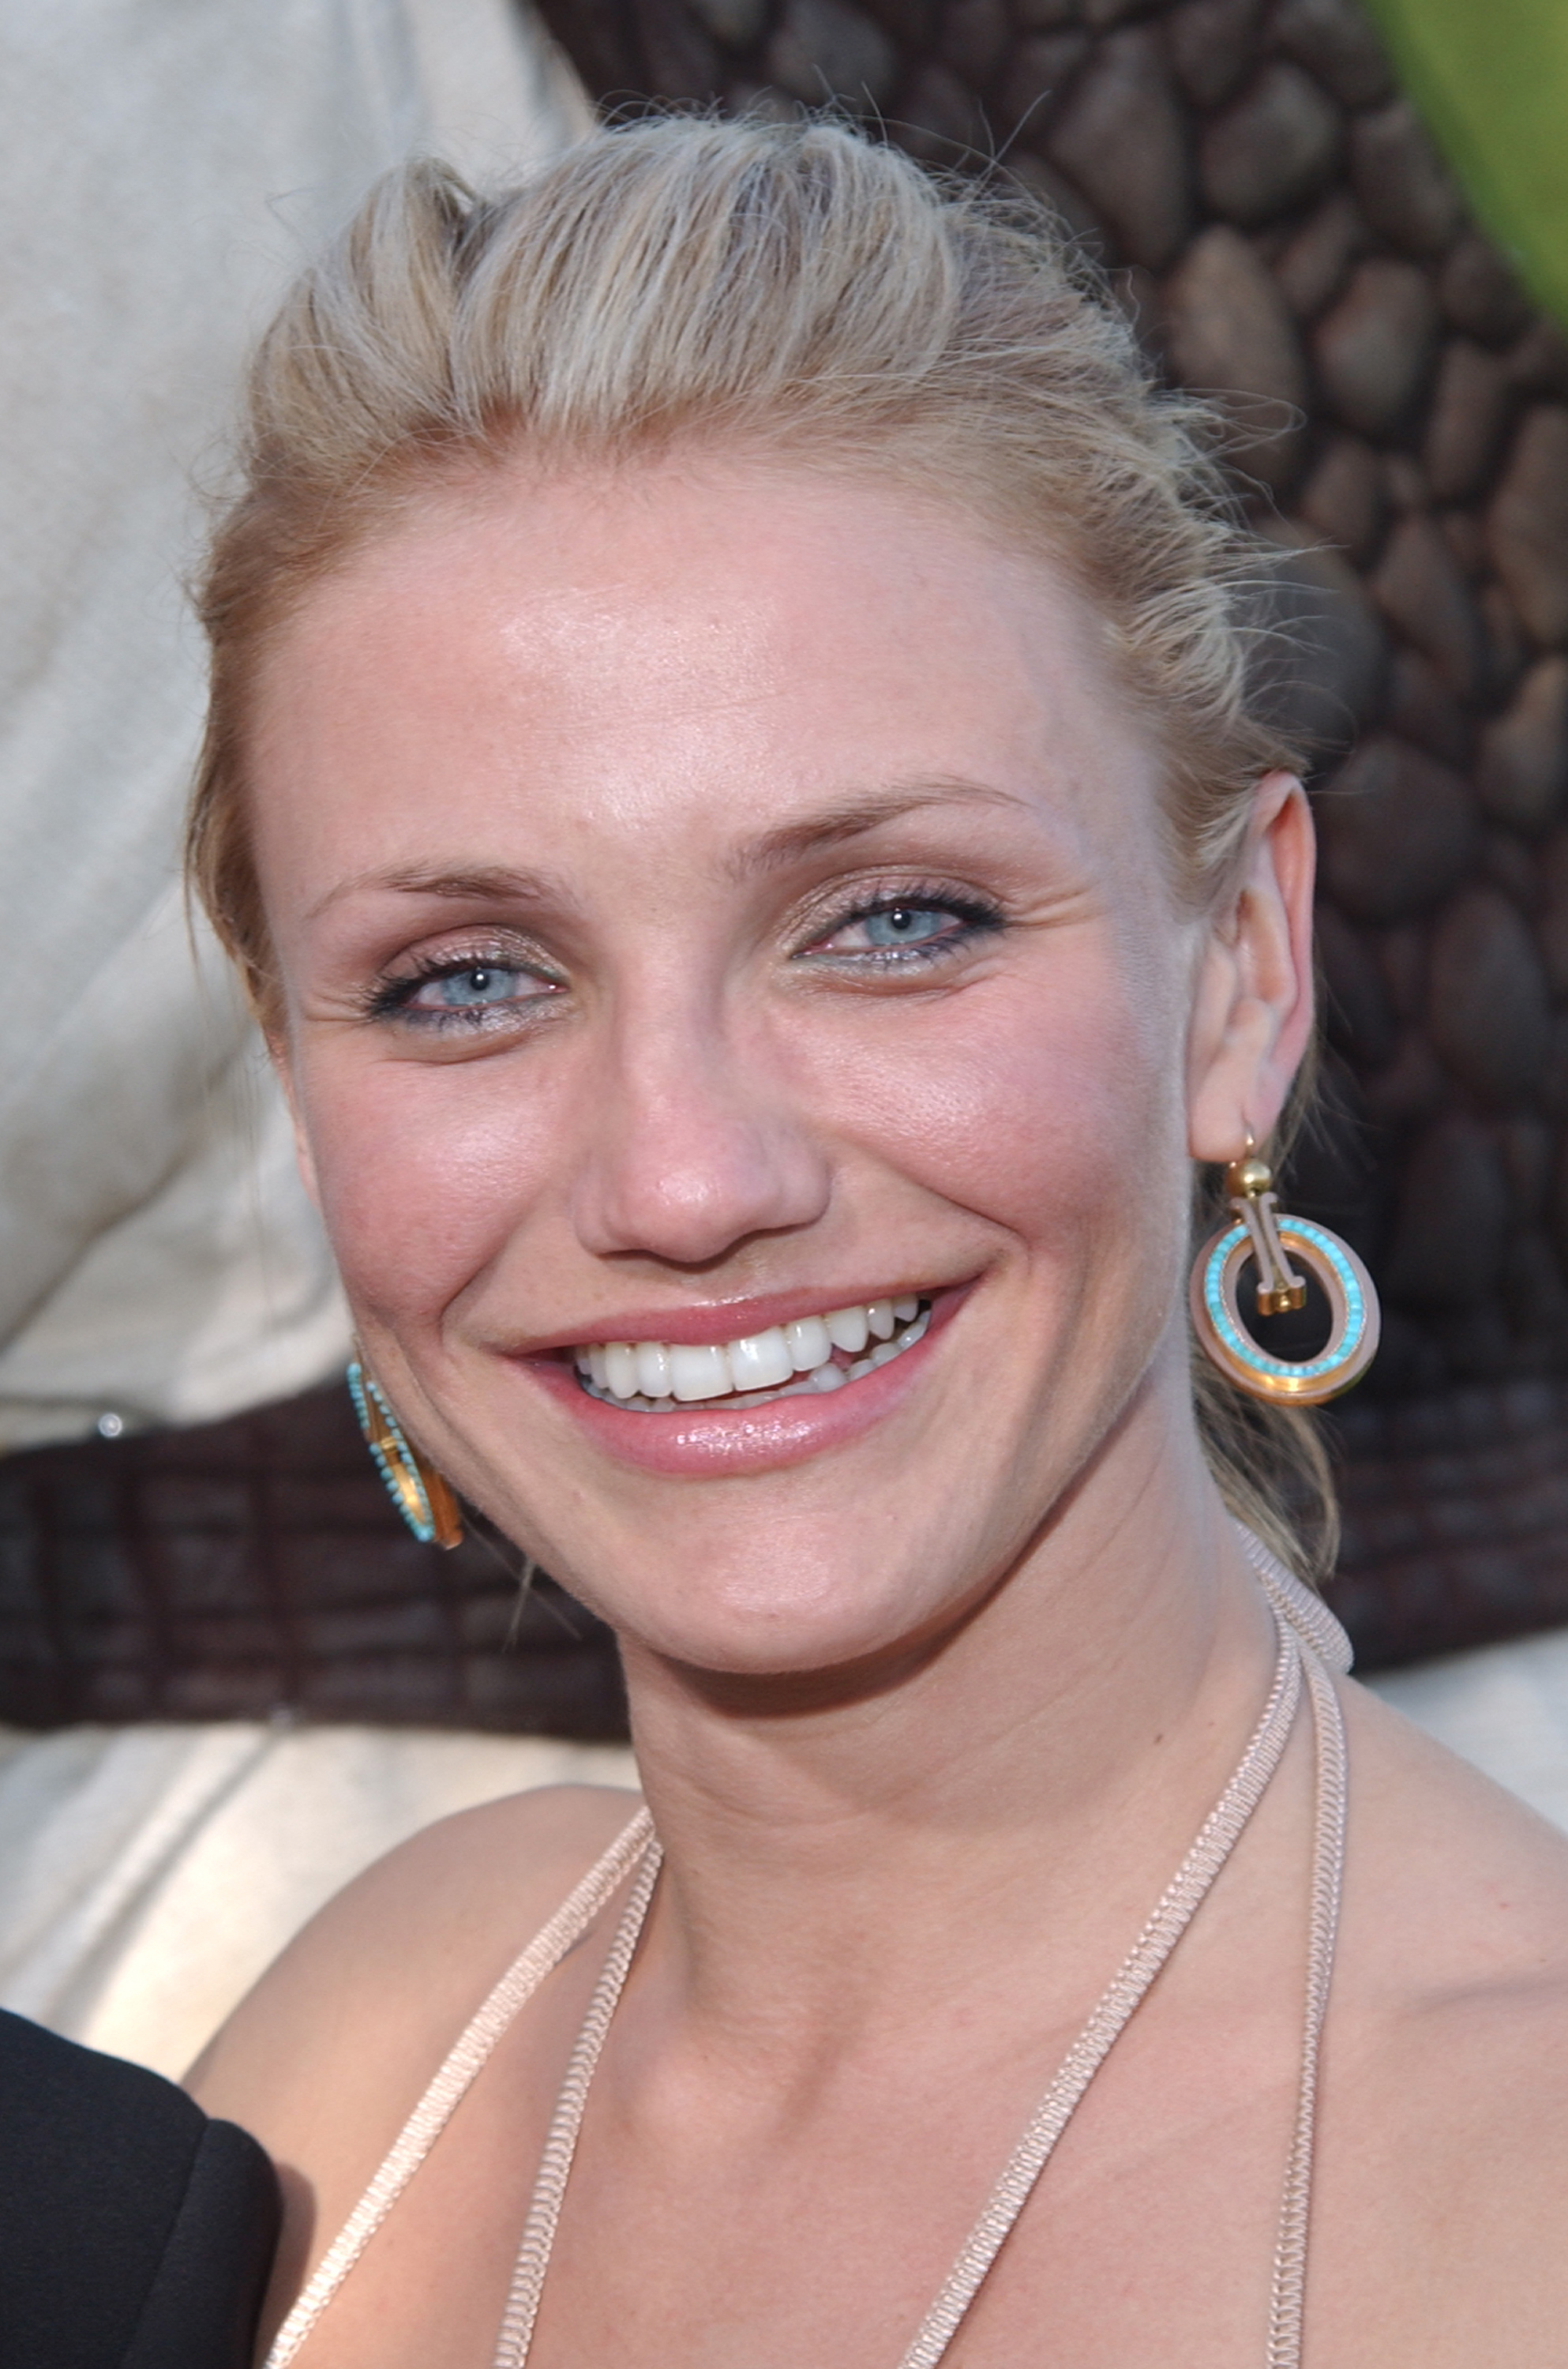 Cameron Diaz during the Los Angeles premiere of "Shrek 2" in Westwood, California | Source: Getty Images